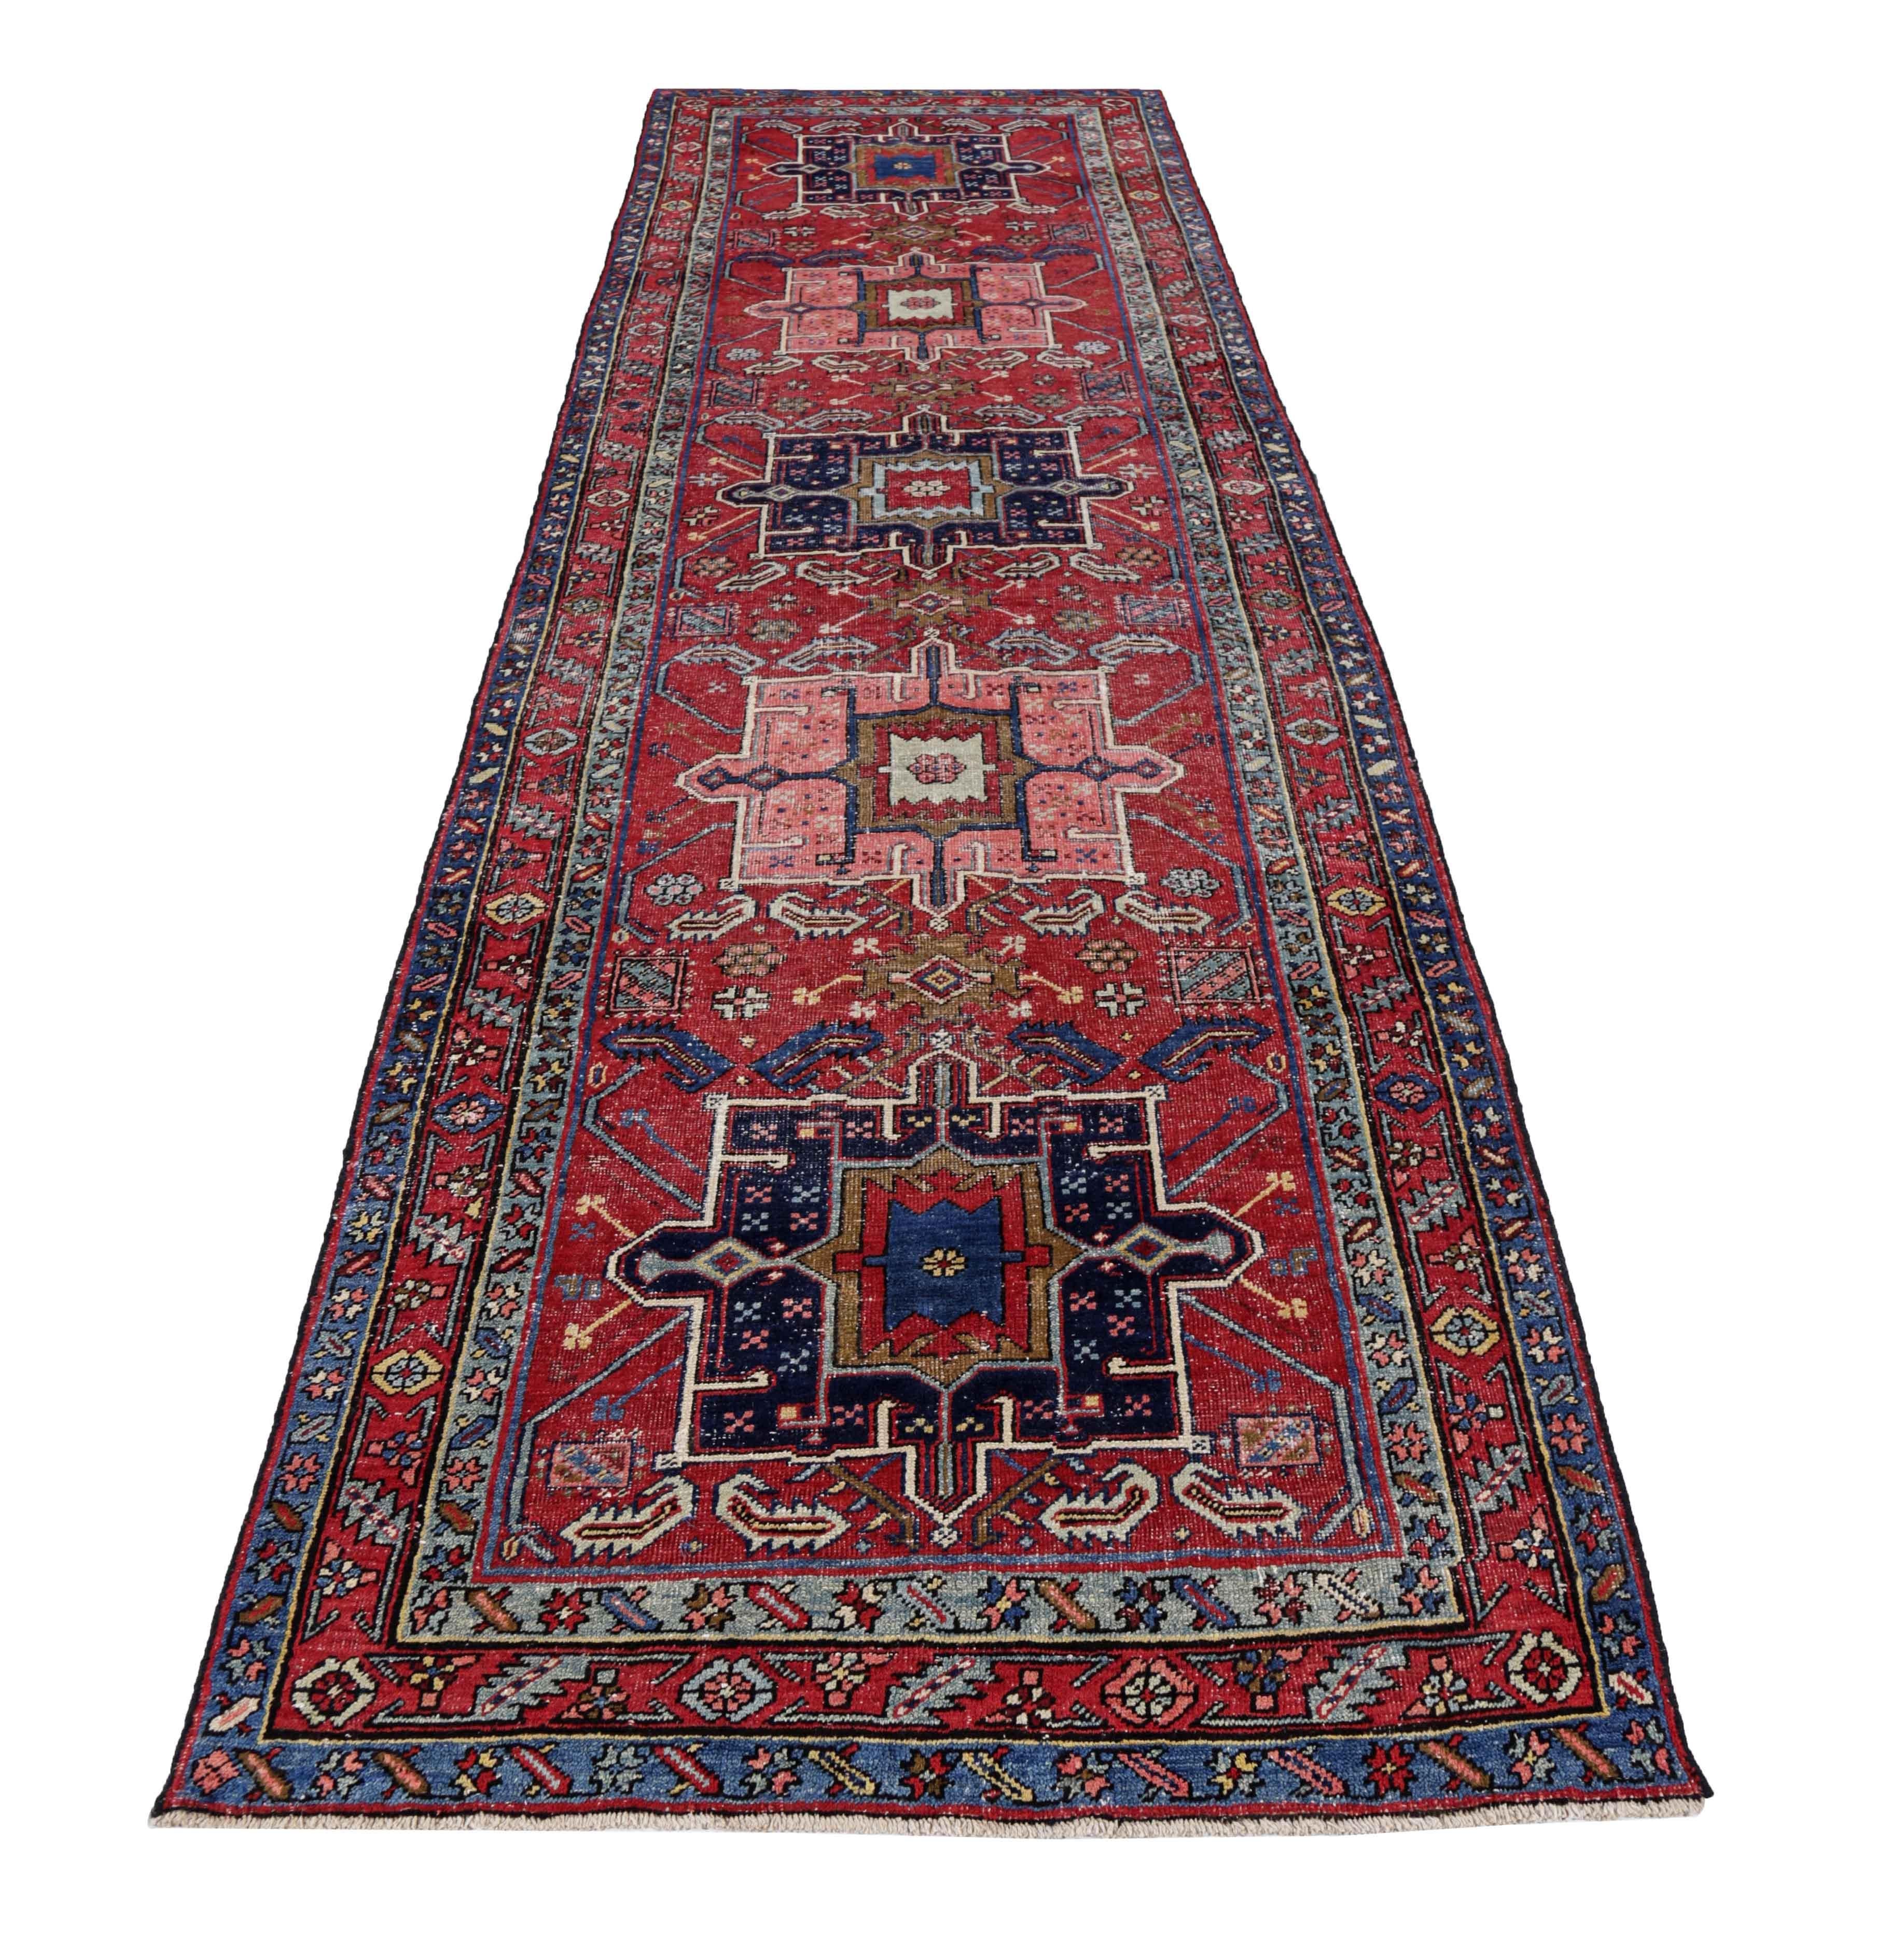 Antique Persian runner rug handwoven from the finest sheep’s wool. It’s colored with all-natural vegetable dyes that are safe for humans and pets. It’s a traditional Heriz design handwoven by expert artisans. It’s a lovely runner rug that can be